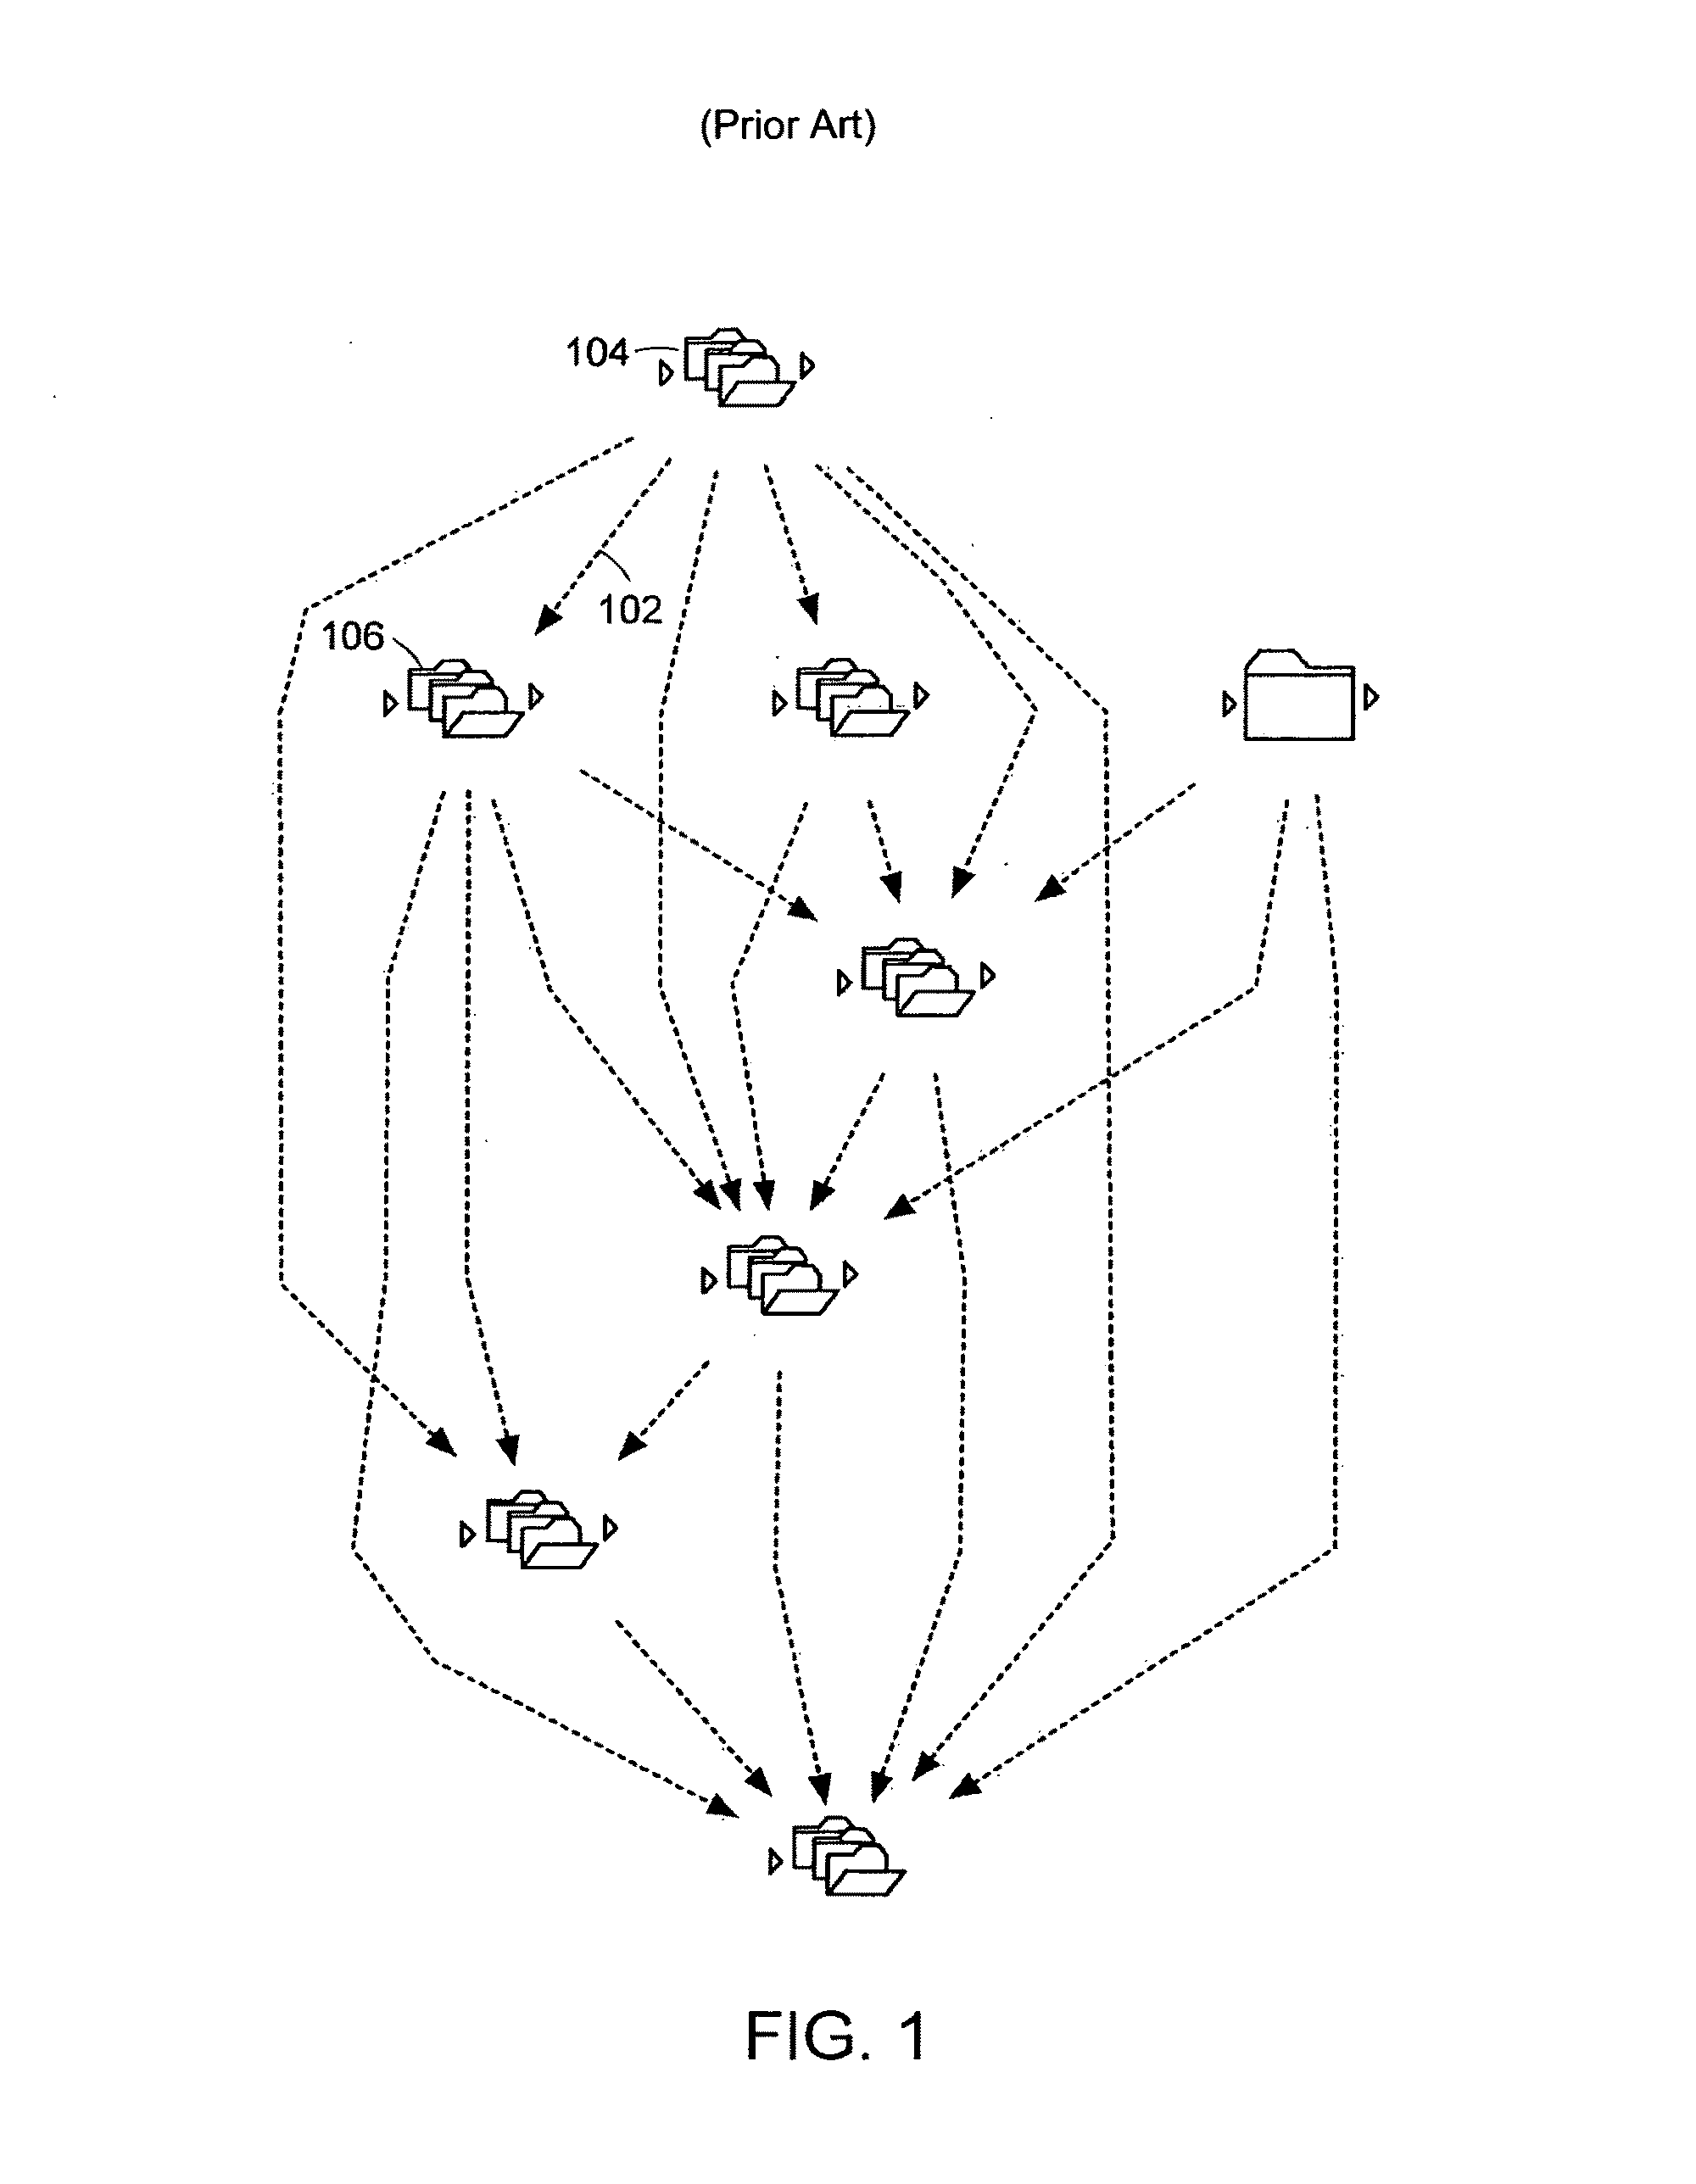 Apparatus and methods for displaying and determining dependency relationships among subsystems in a computer software system